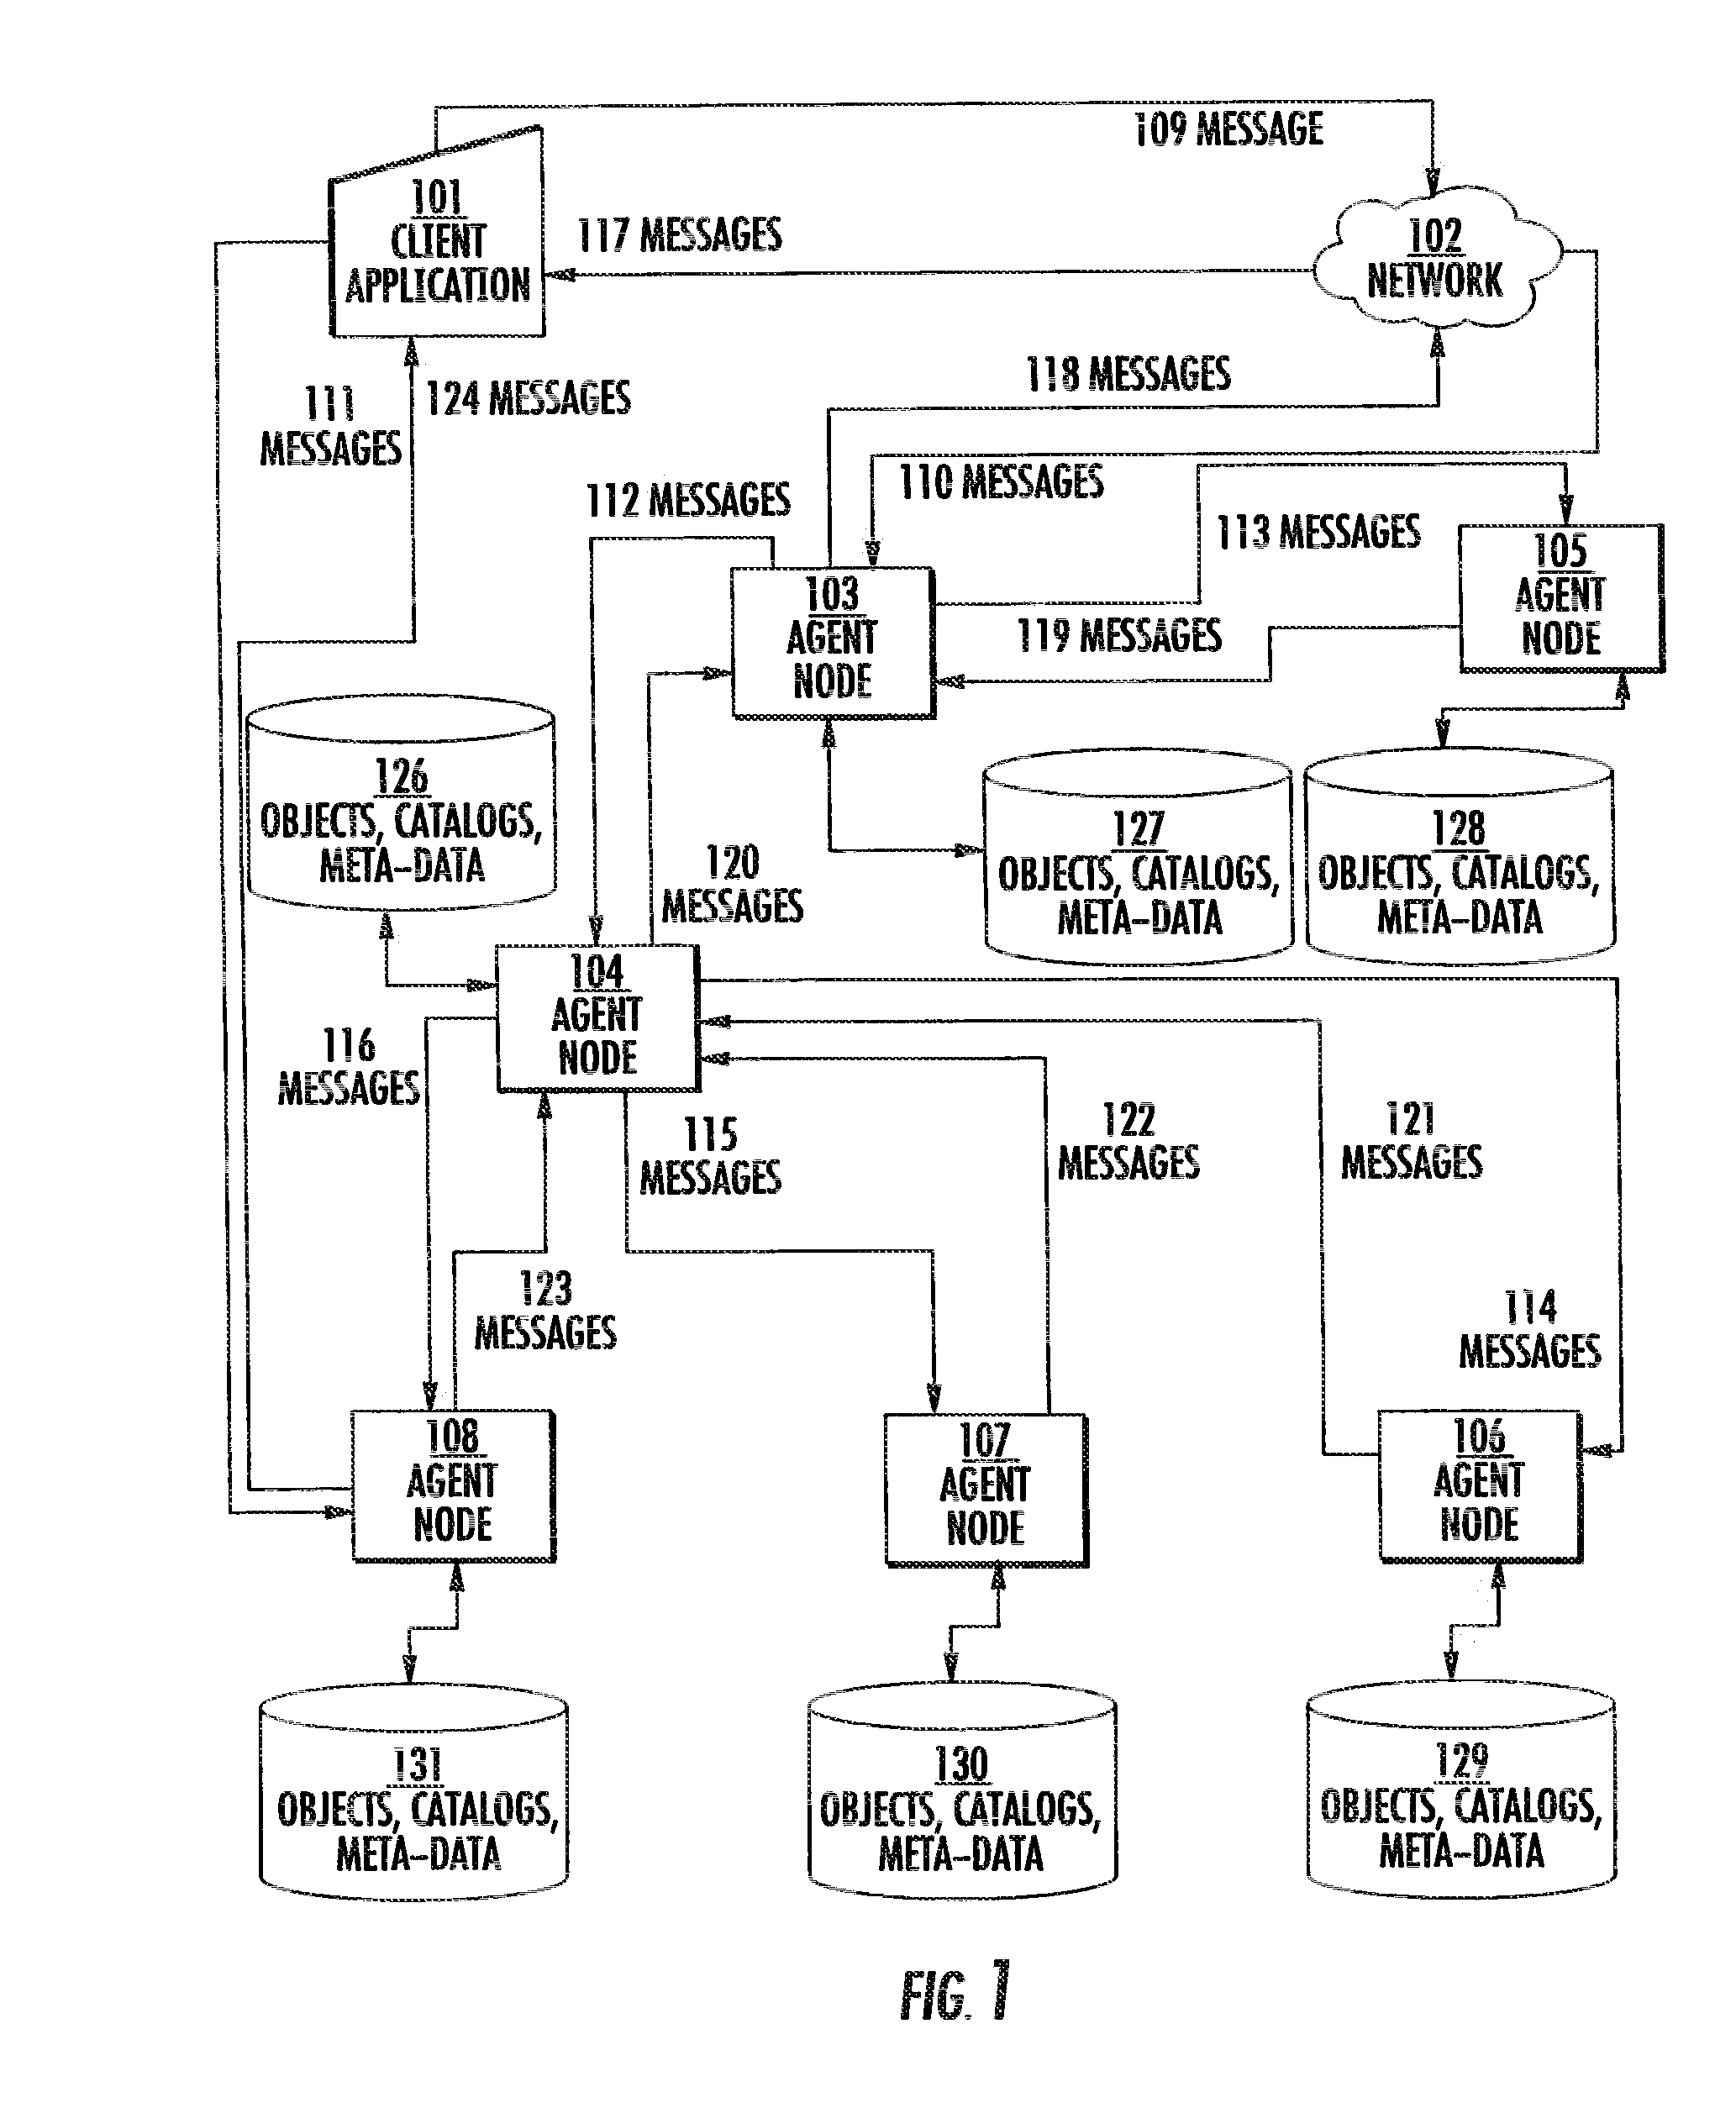 Storing and retrieving objects on a computer network in a distributed database